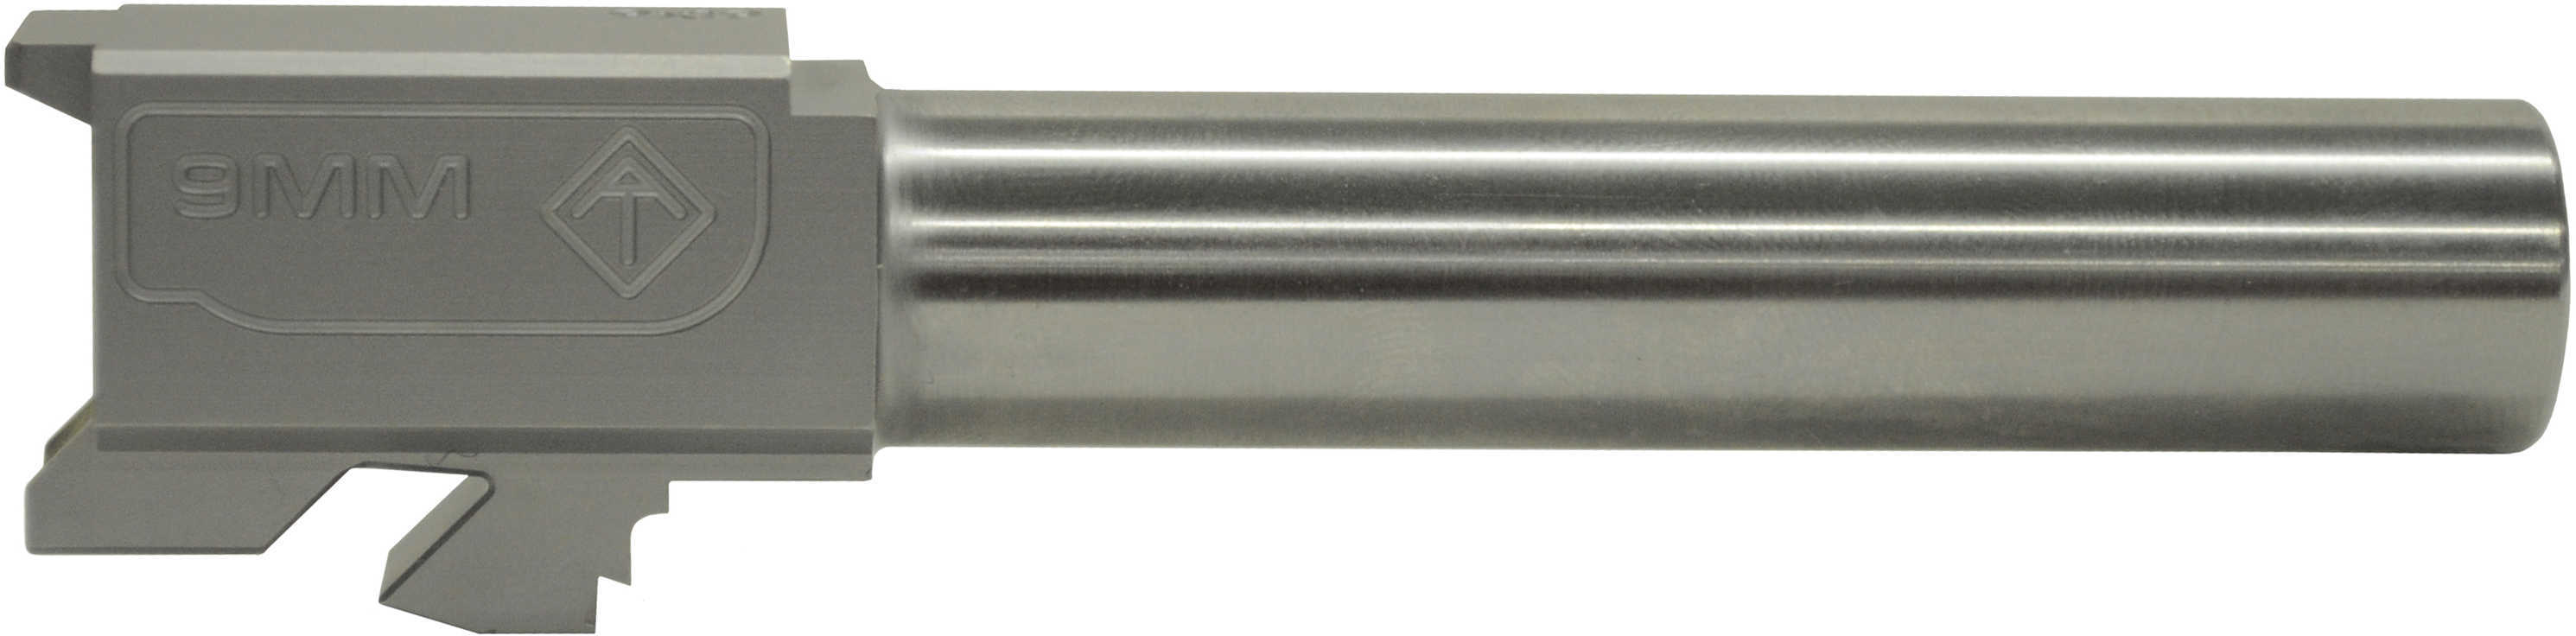 ATI BG19 Non-Threaded Barrel 9mm Luger 4" fits Glock 19 Stainless Steel